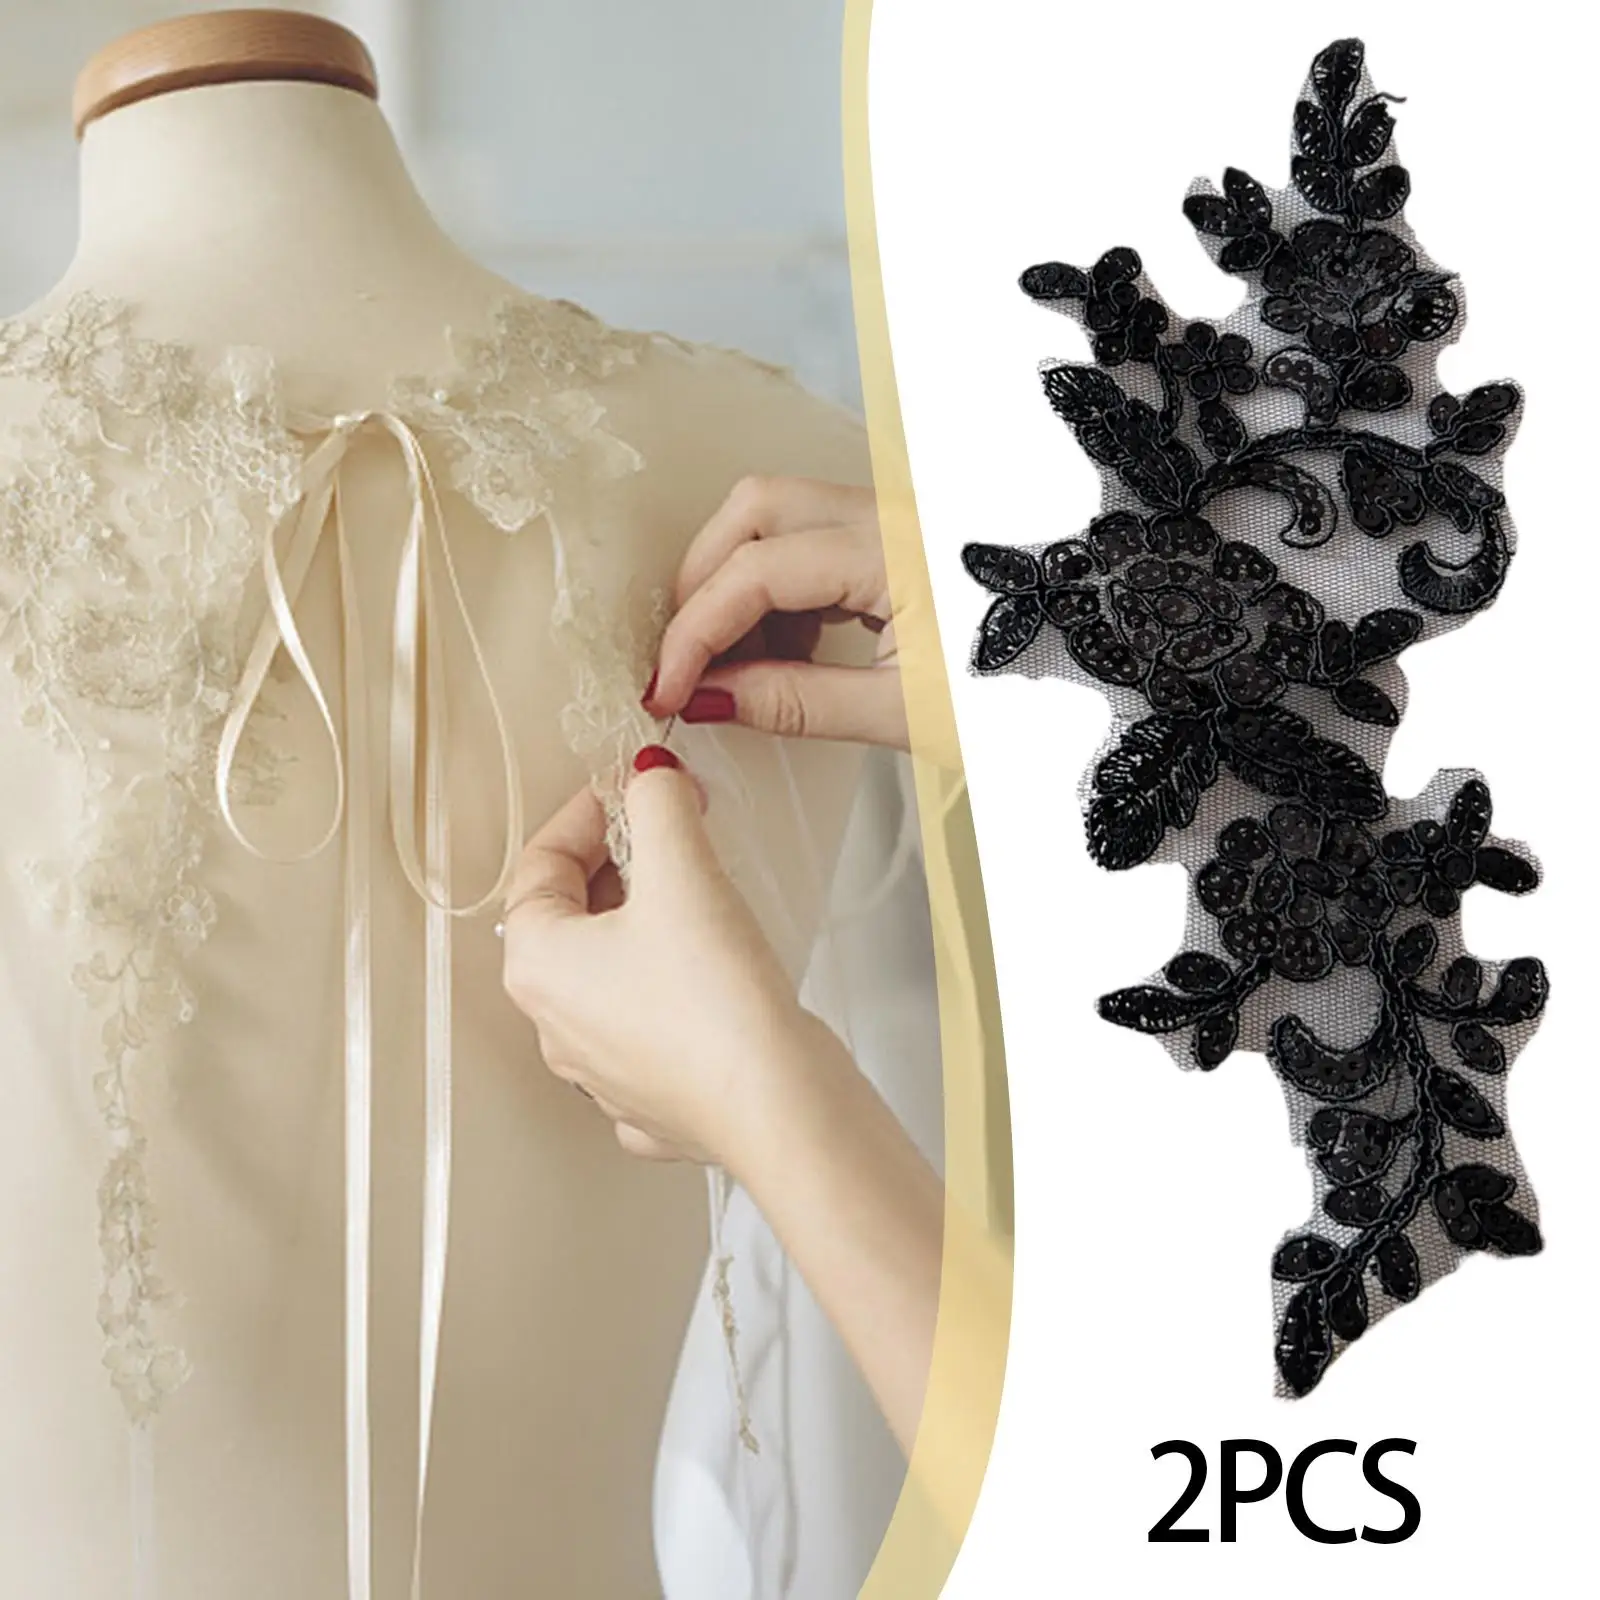 2x Lace Applique Lace Trims Embroidery Appliques Sew on Patches for Repairing Decorating Sewing Crafts Evening Dress Costume